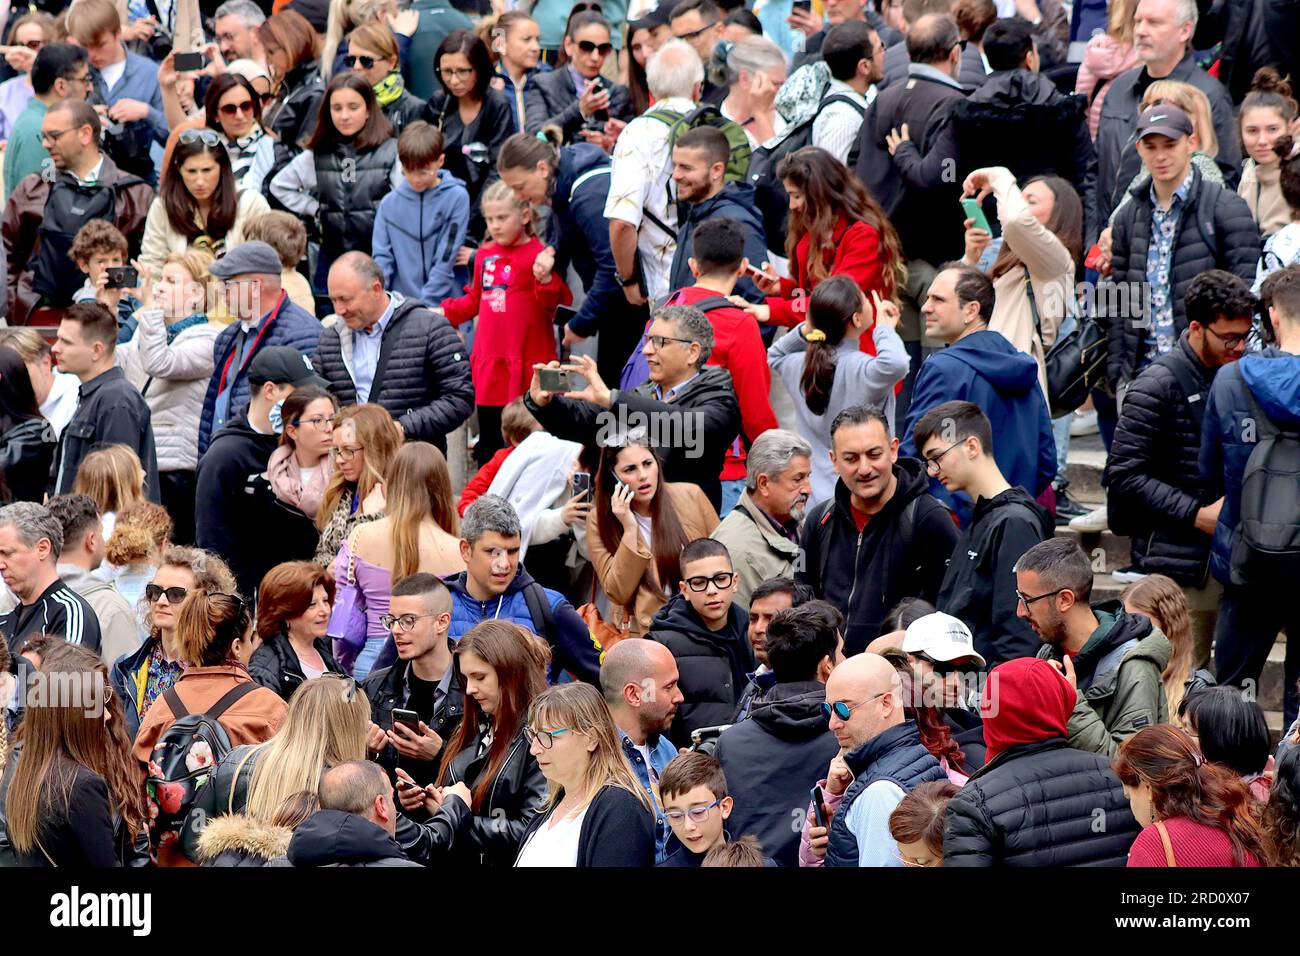 Large crowds of tourists and Italians gather to view the Trevi fountain despite overcast weather combined with a four day Italian Bank Holiday. Stock Photo